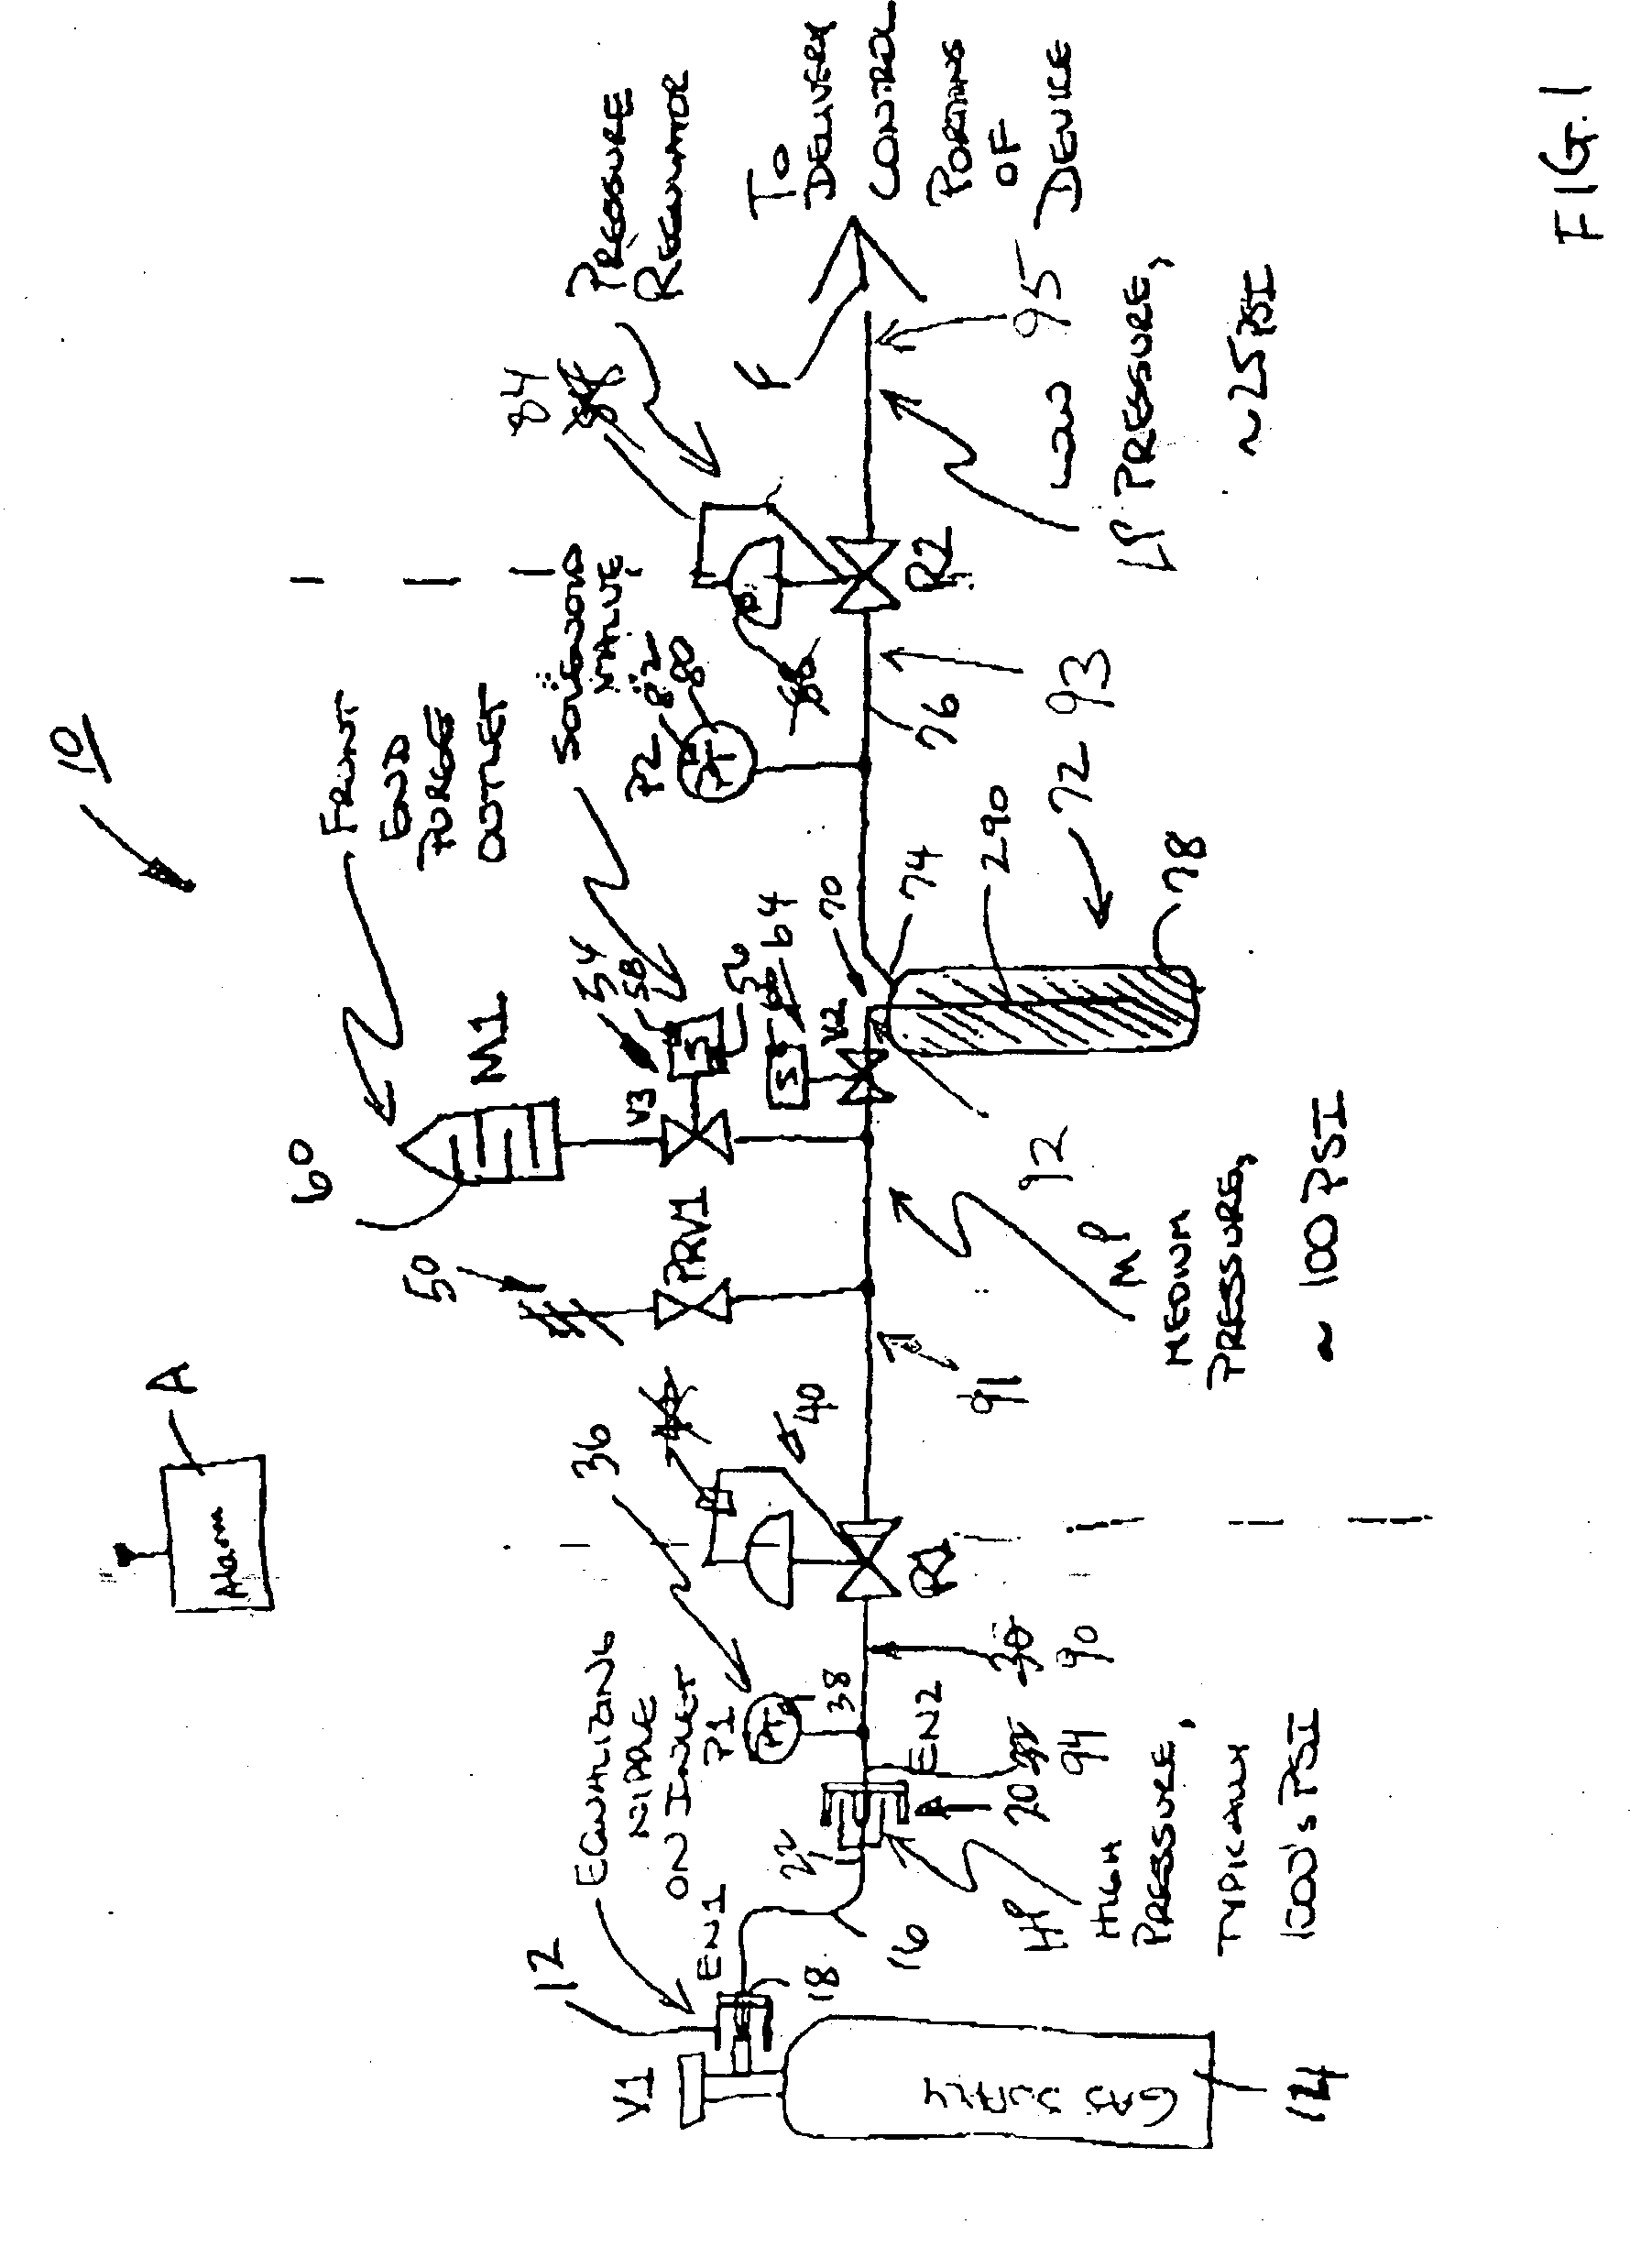 System for use in administrating therapeutic gas to a patient